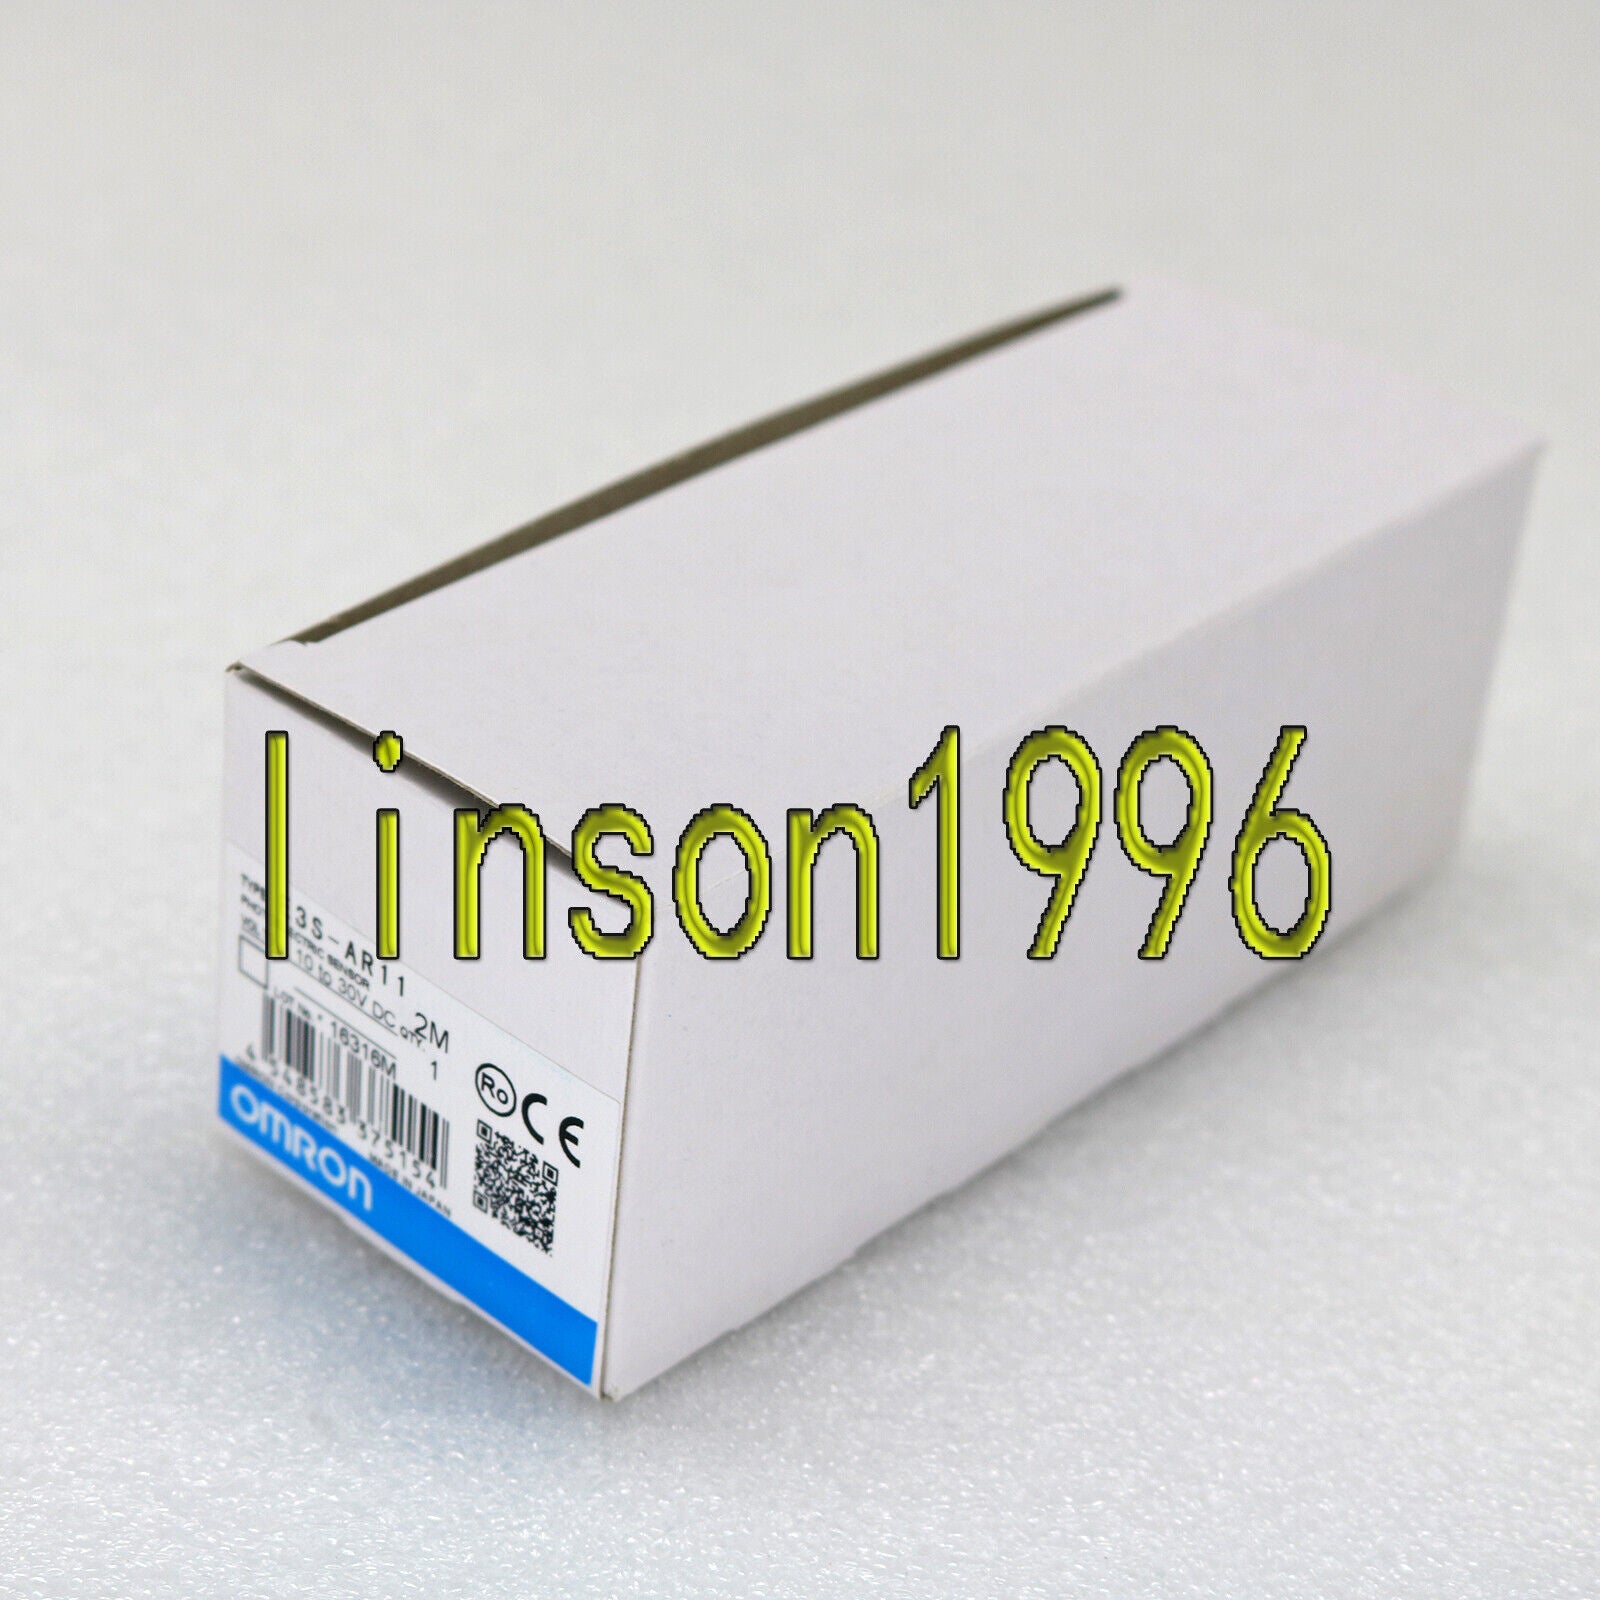 new ONE  Omron Optical fiber amplifier E3S-AR11 One year